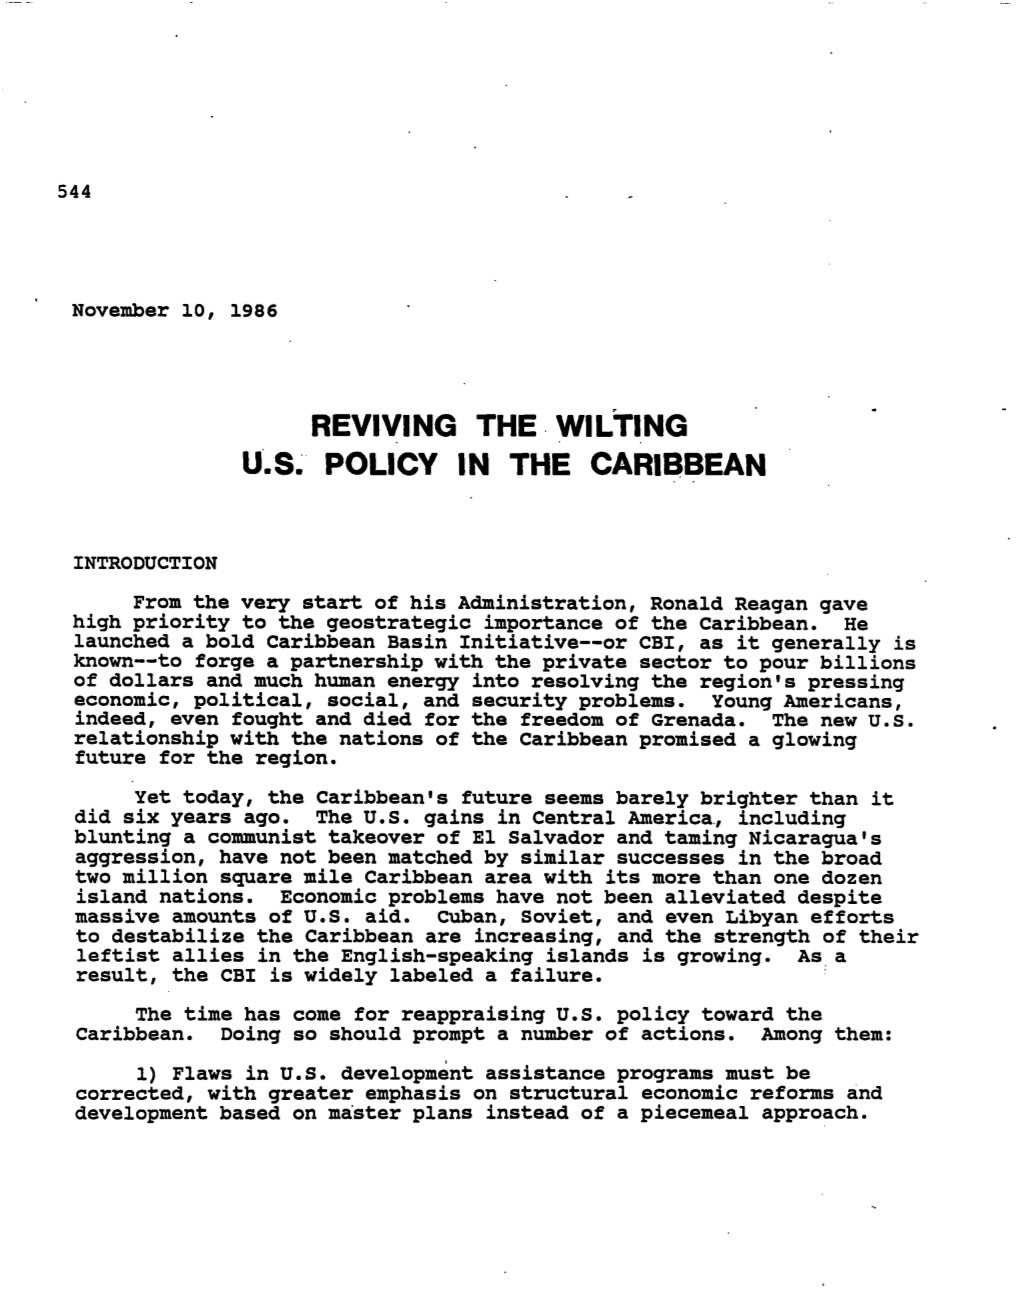 Reviving The. Wilting U'.S. Policy in the Caribbean